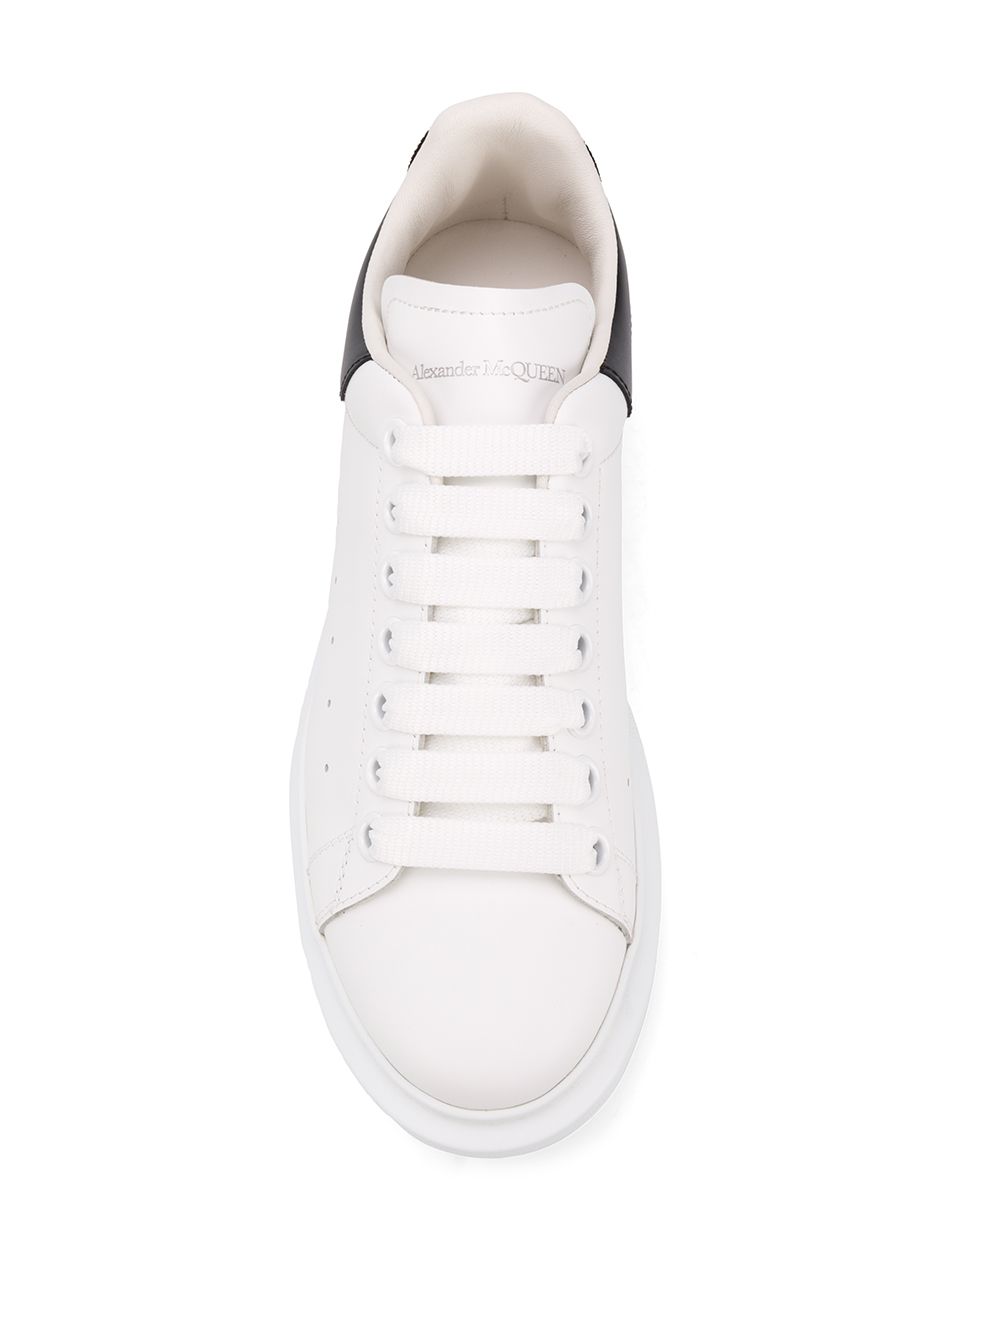 Shop Alexander McQueen Oversized heart patch sneakers with Express ...